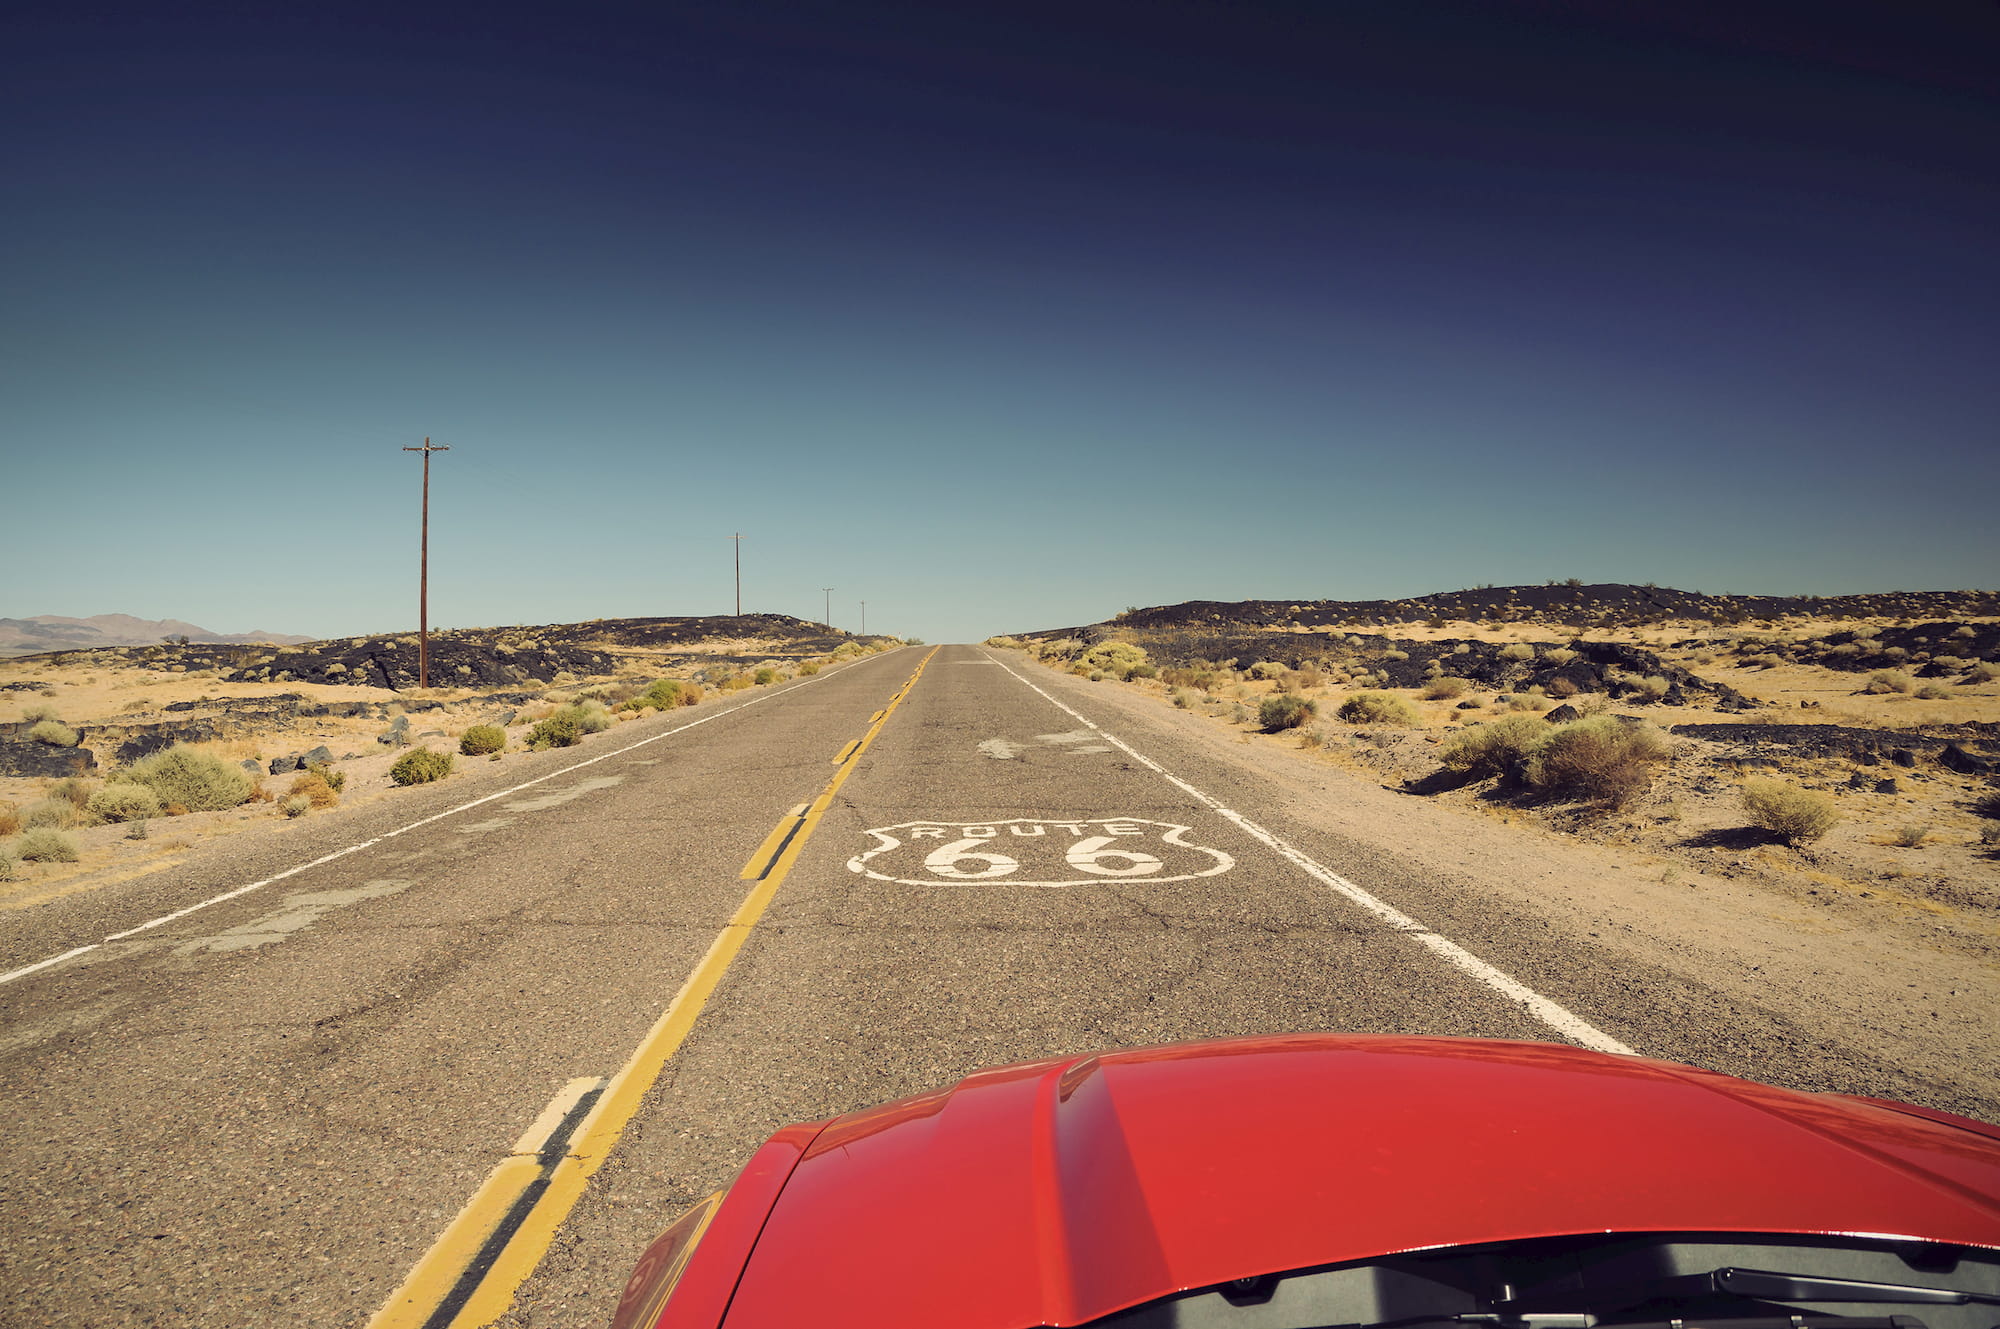 route 66 sign painted on road